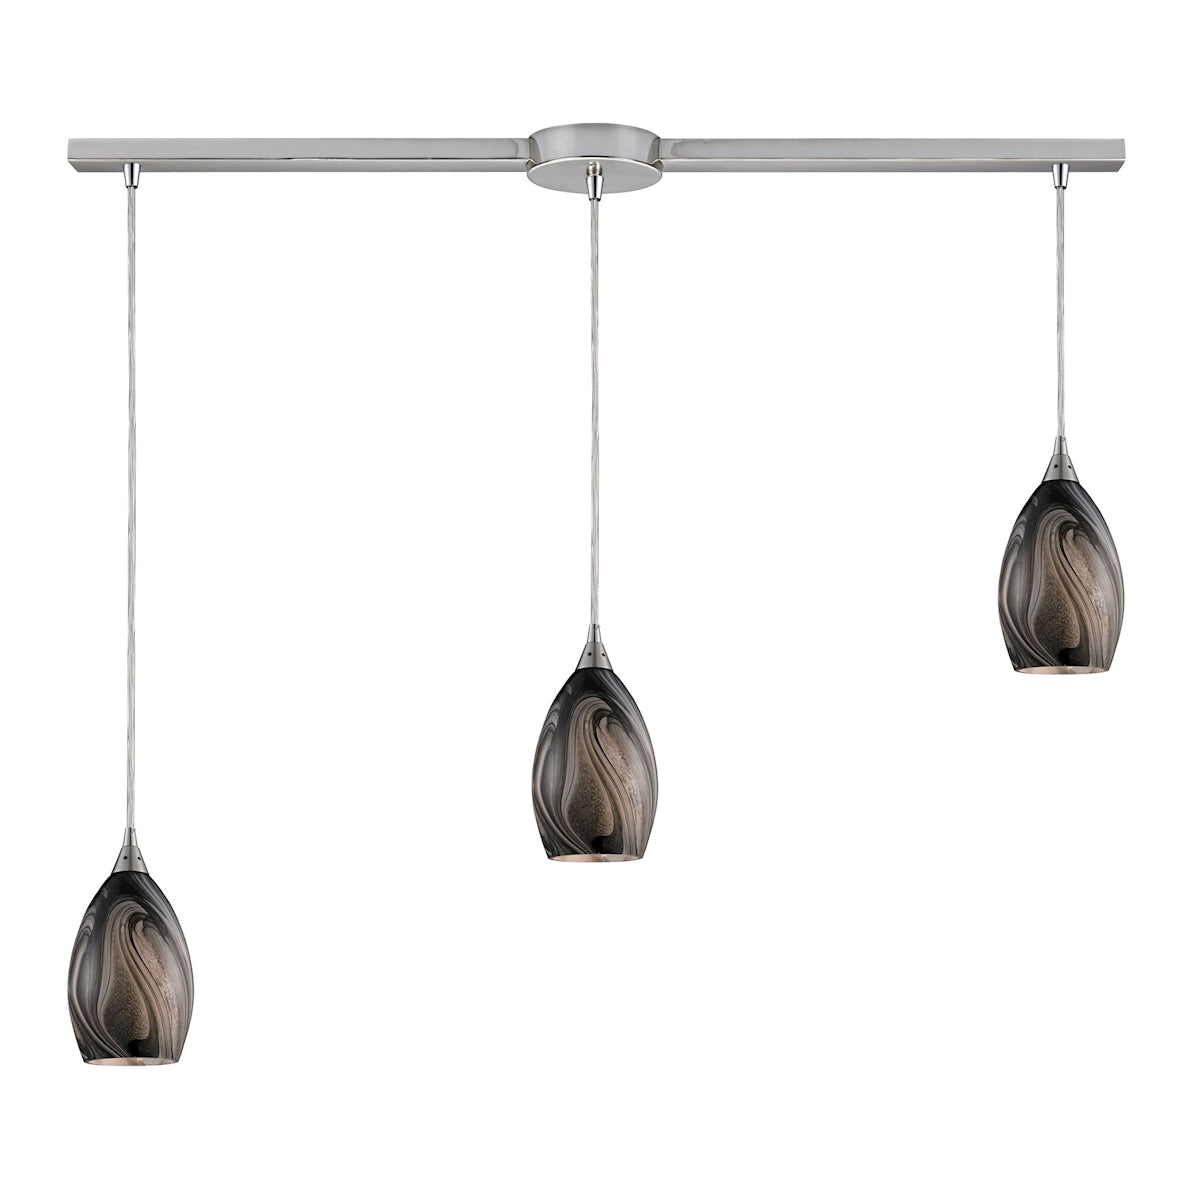 ELK Lighting 31133/3L-ASH Formations 3-Light Linear Pendant Fixture in Satin Nickel with Ashflow Glass